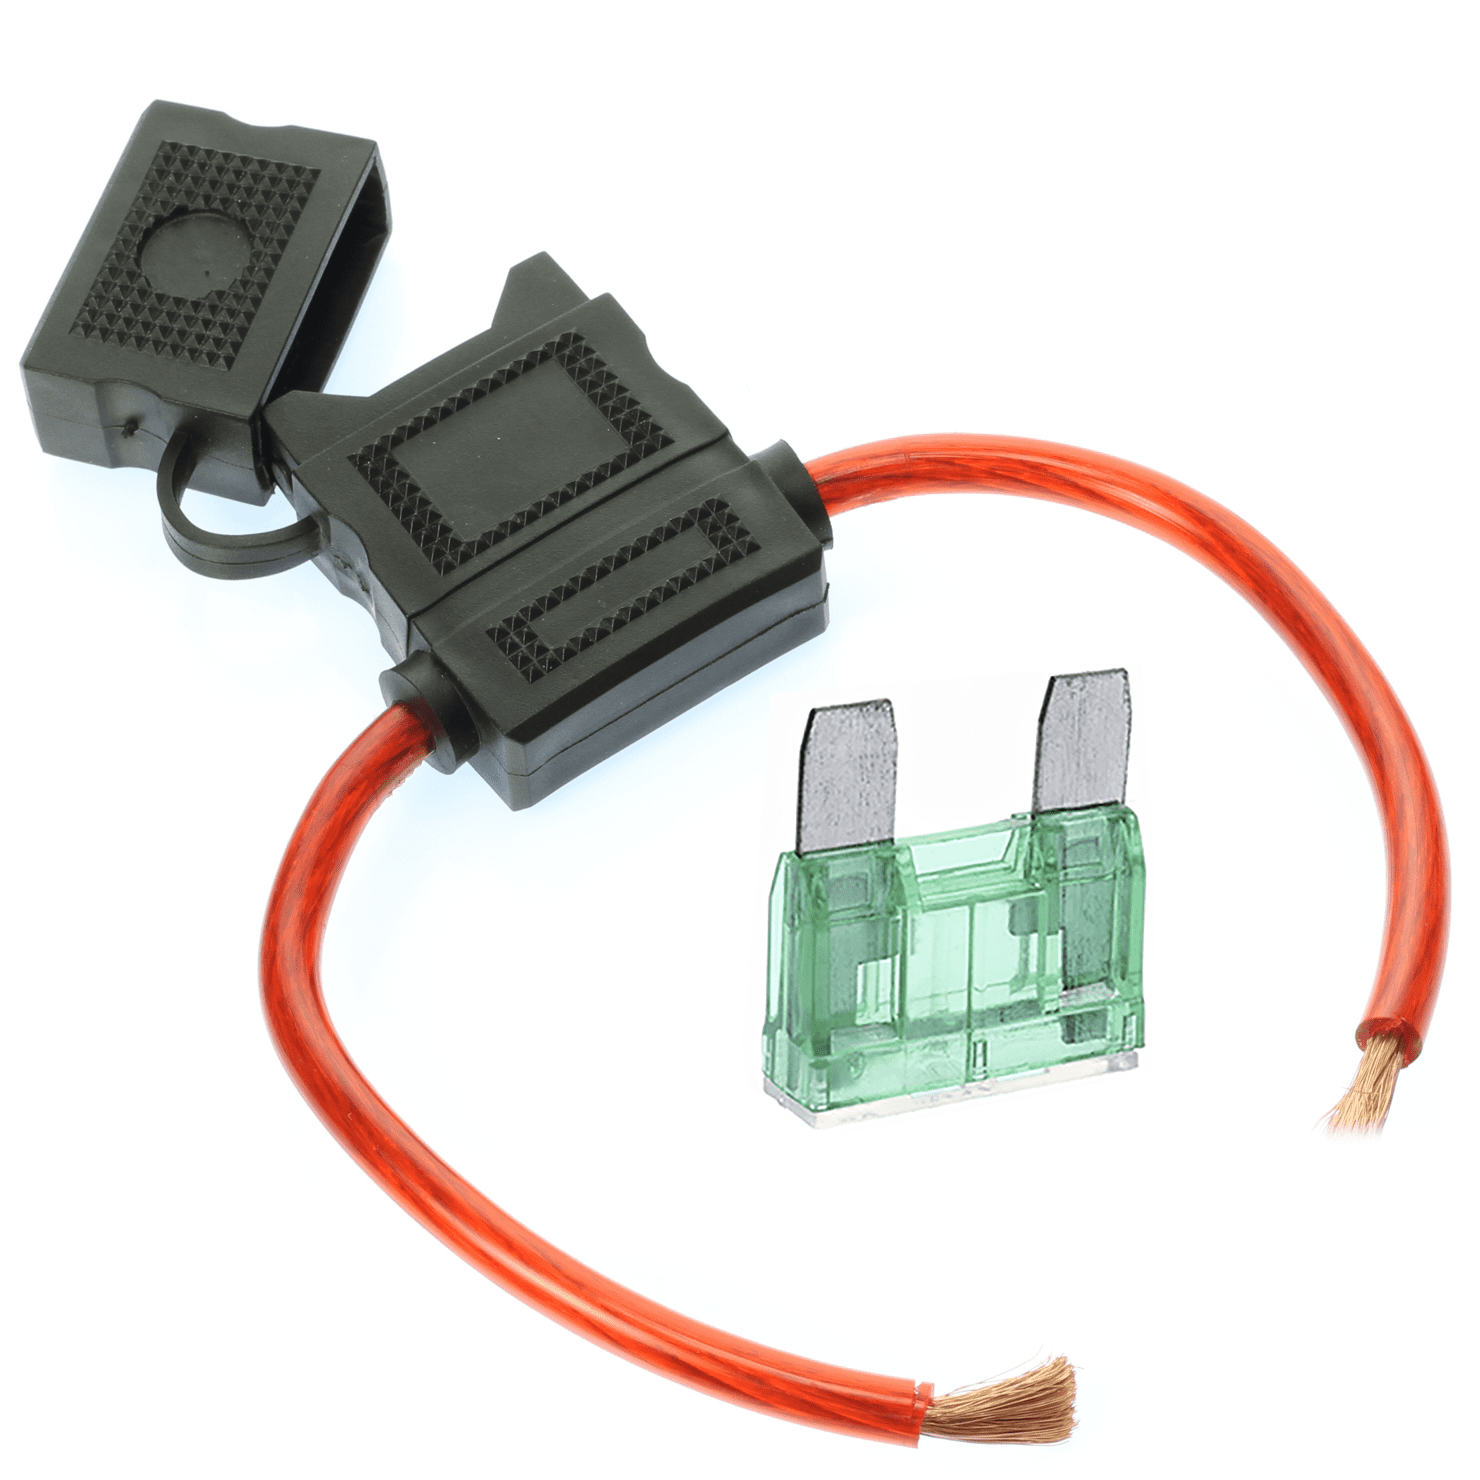 ZOOKOTO 2Pcs 80Amp Inline AGU Fuse Holder Fuse Block Fits 4/8/10 Gauge Wire With Fuse